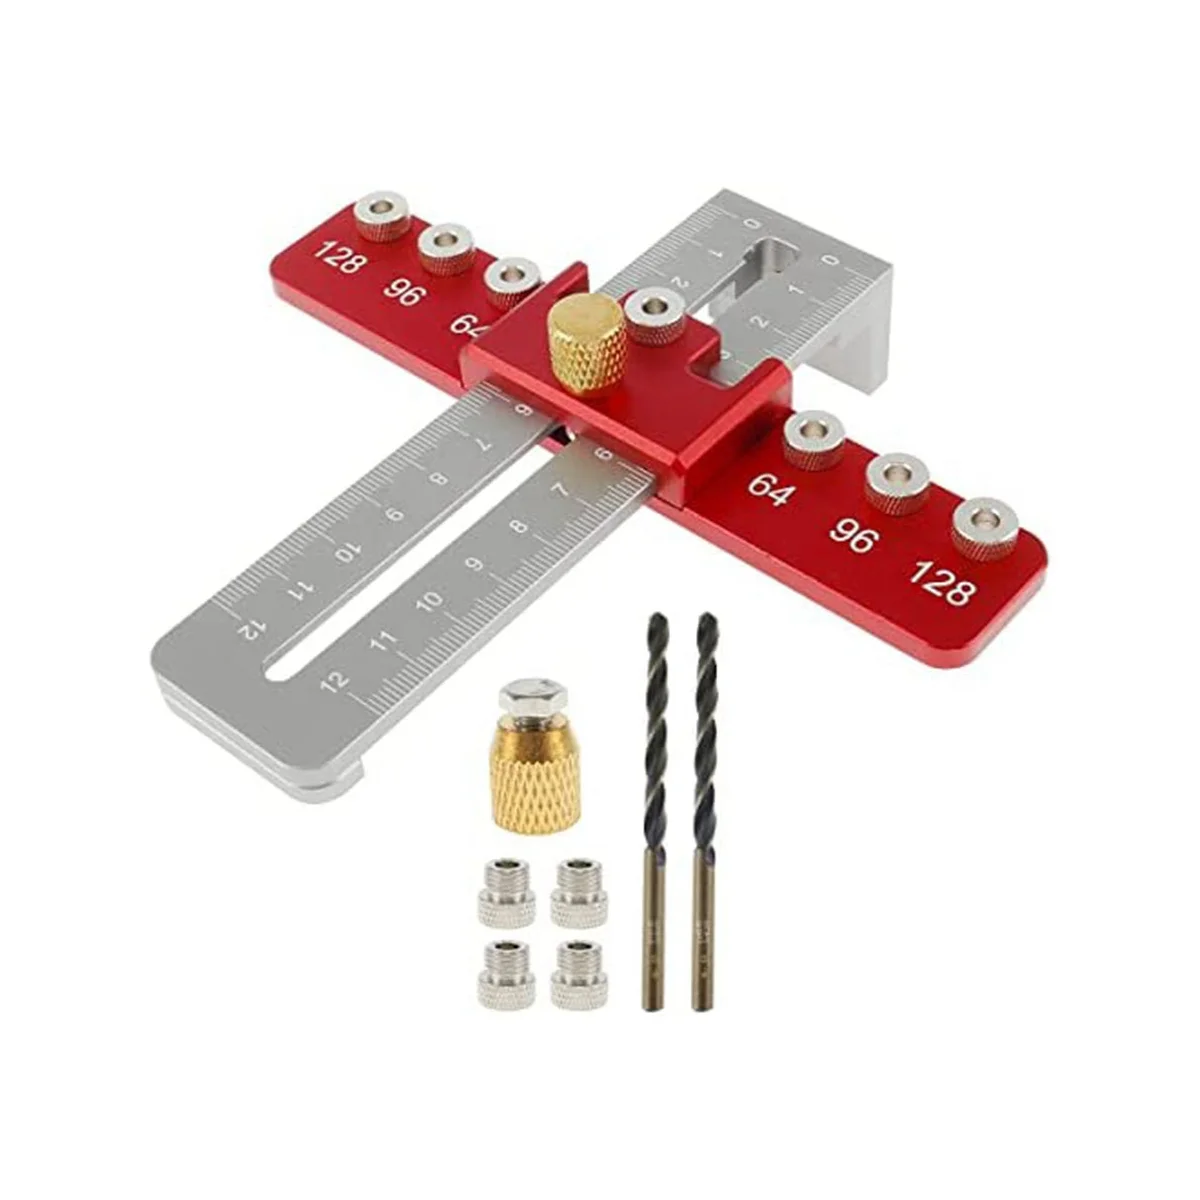 

Cabinet Hardware Jig,Alloy Cabinet Handle Jig,Adjustable Drill Template GuideTool,for Installation of Door Drawer Handle